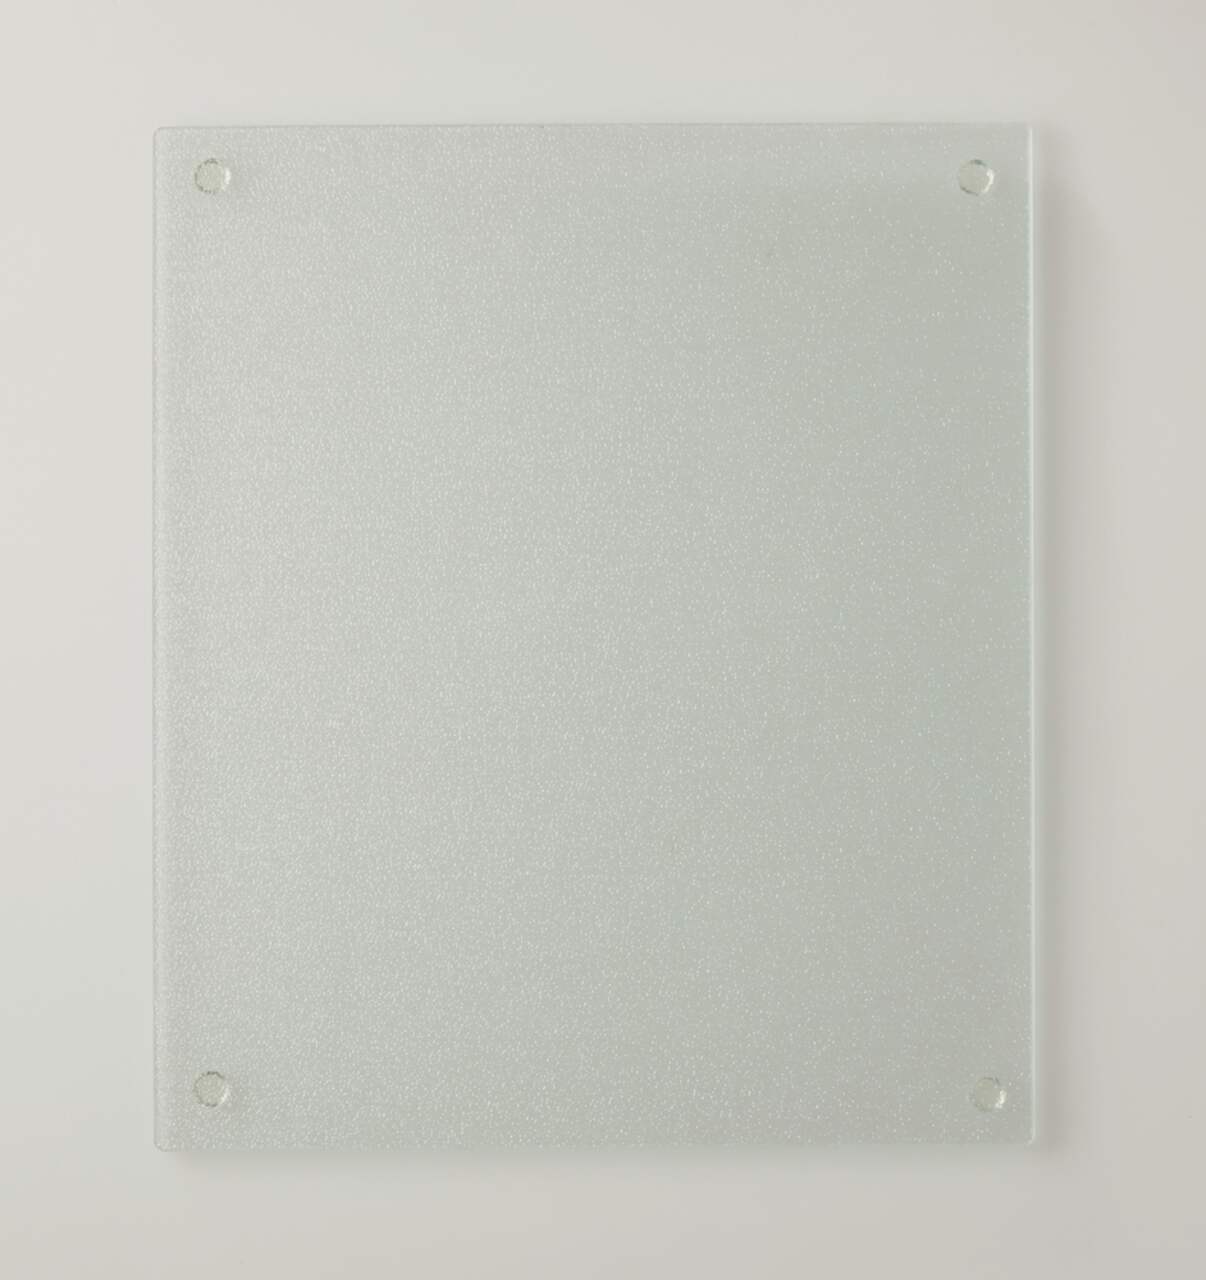 (3 Round 30cm ) - Tempered Glass Cutting Board Long Lasting Clear Glass Scratch Resistant, Heat Resistant, Shatter Resistant, Dishwasher Safe.